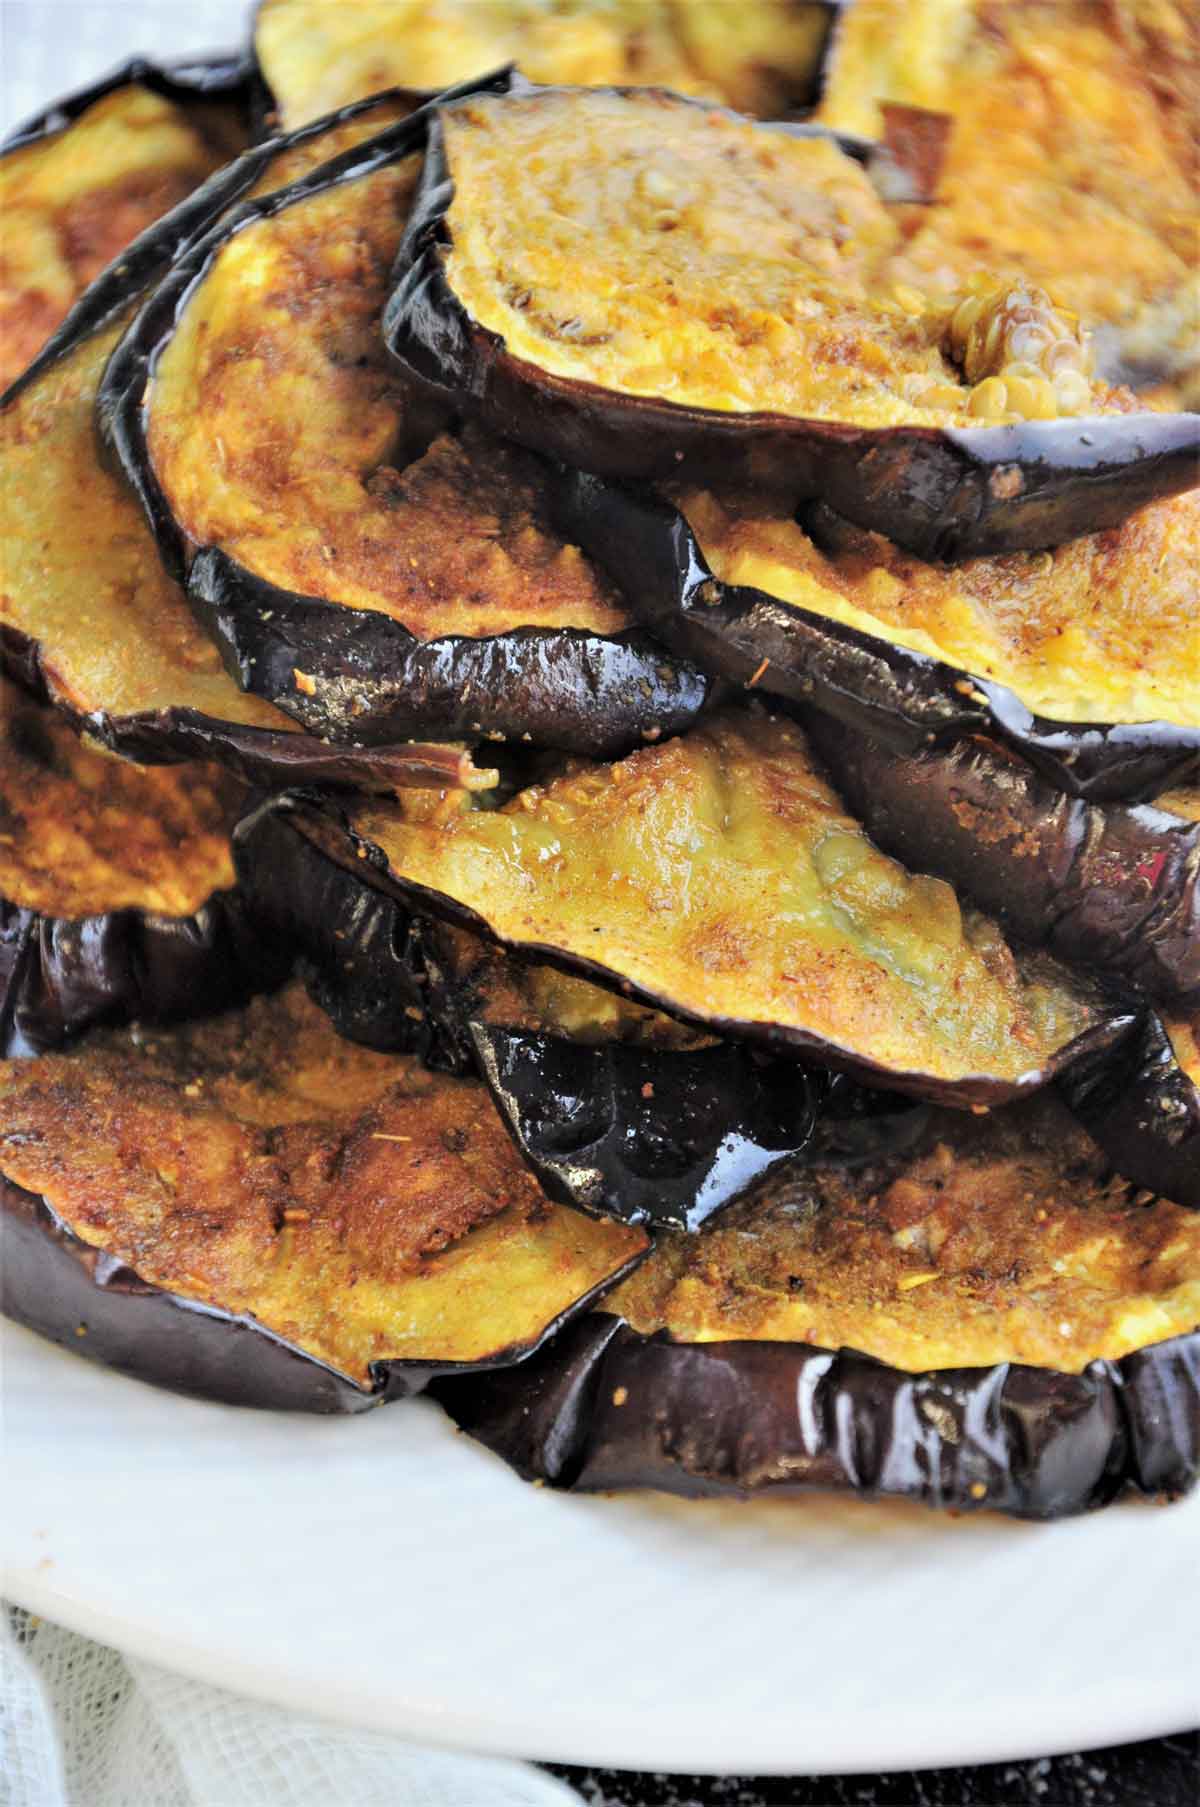 Roasted eggplant slices stacked in a serving plate.